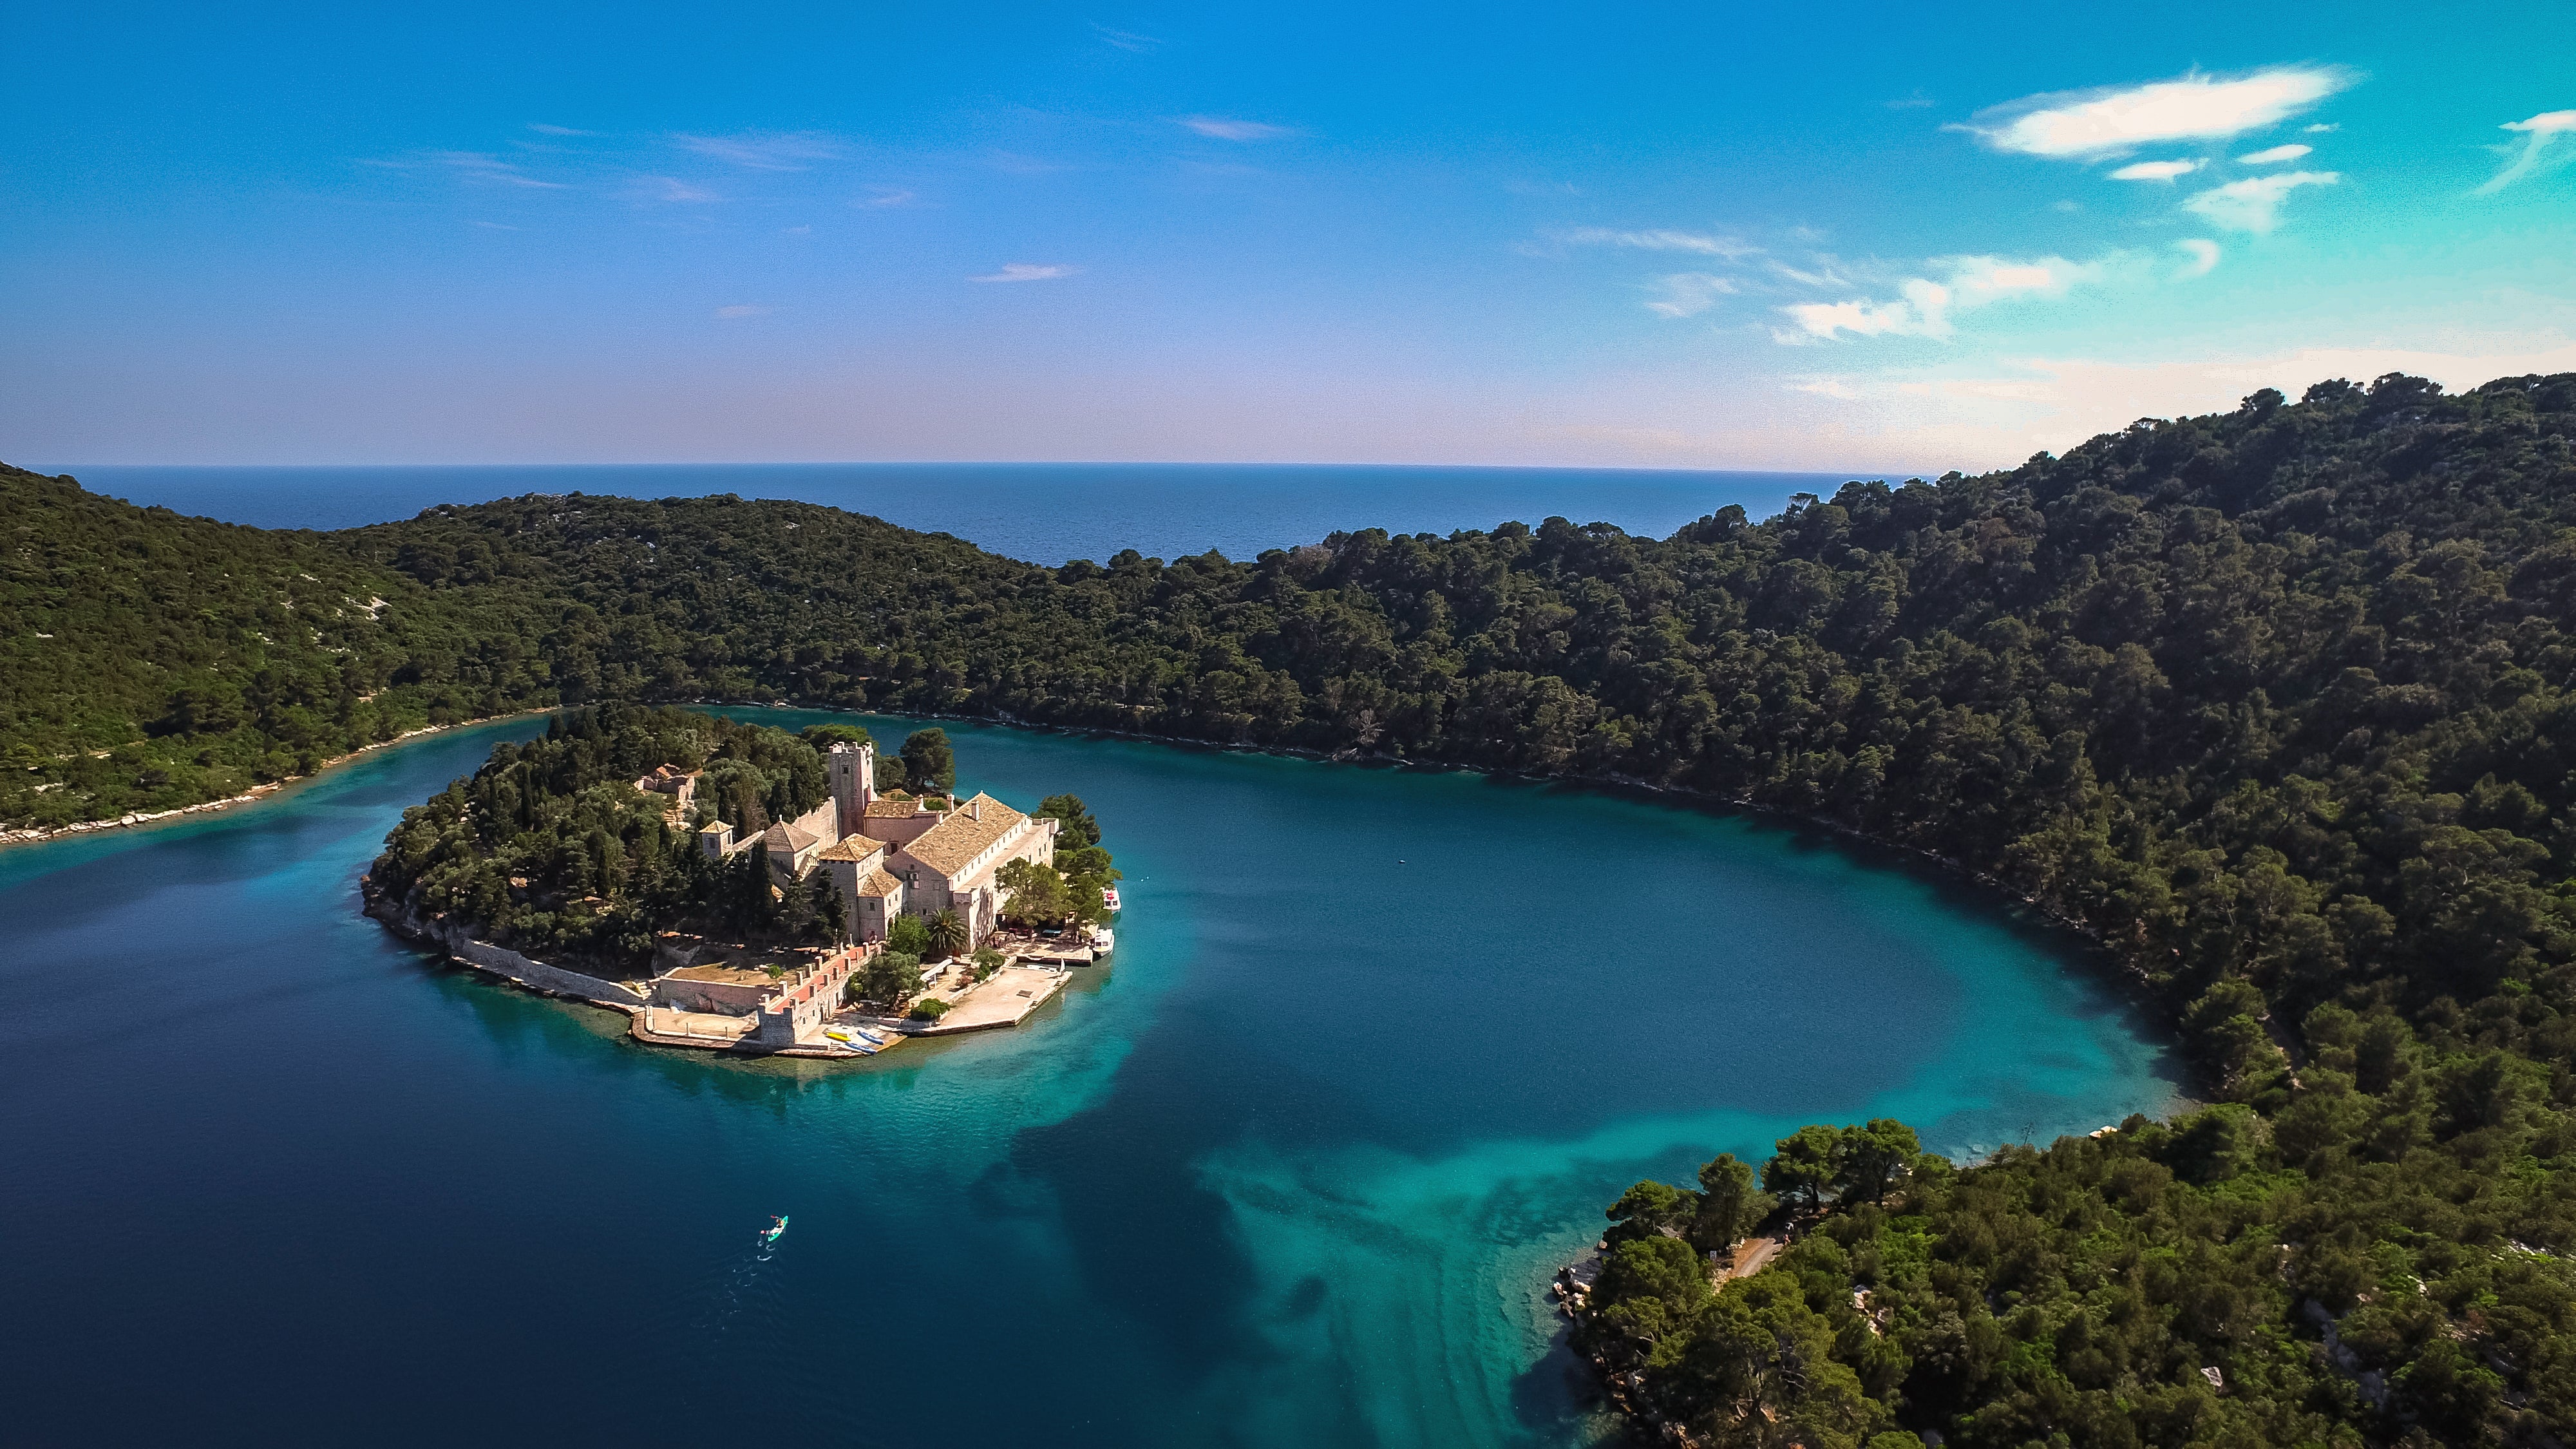 In Mljet, enjoy forest wanders, lake-swimming and discover the pretty islet of St Mary’s